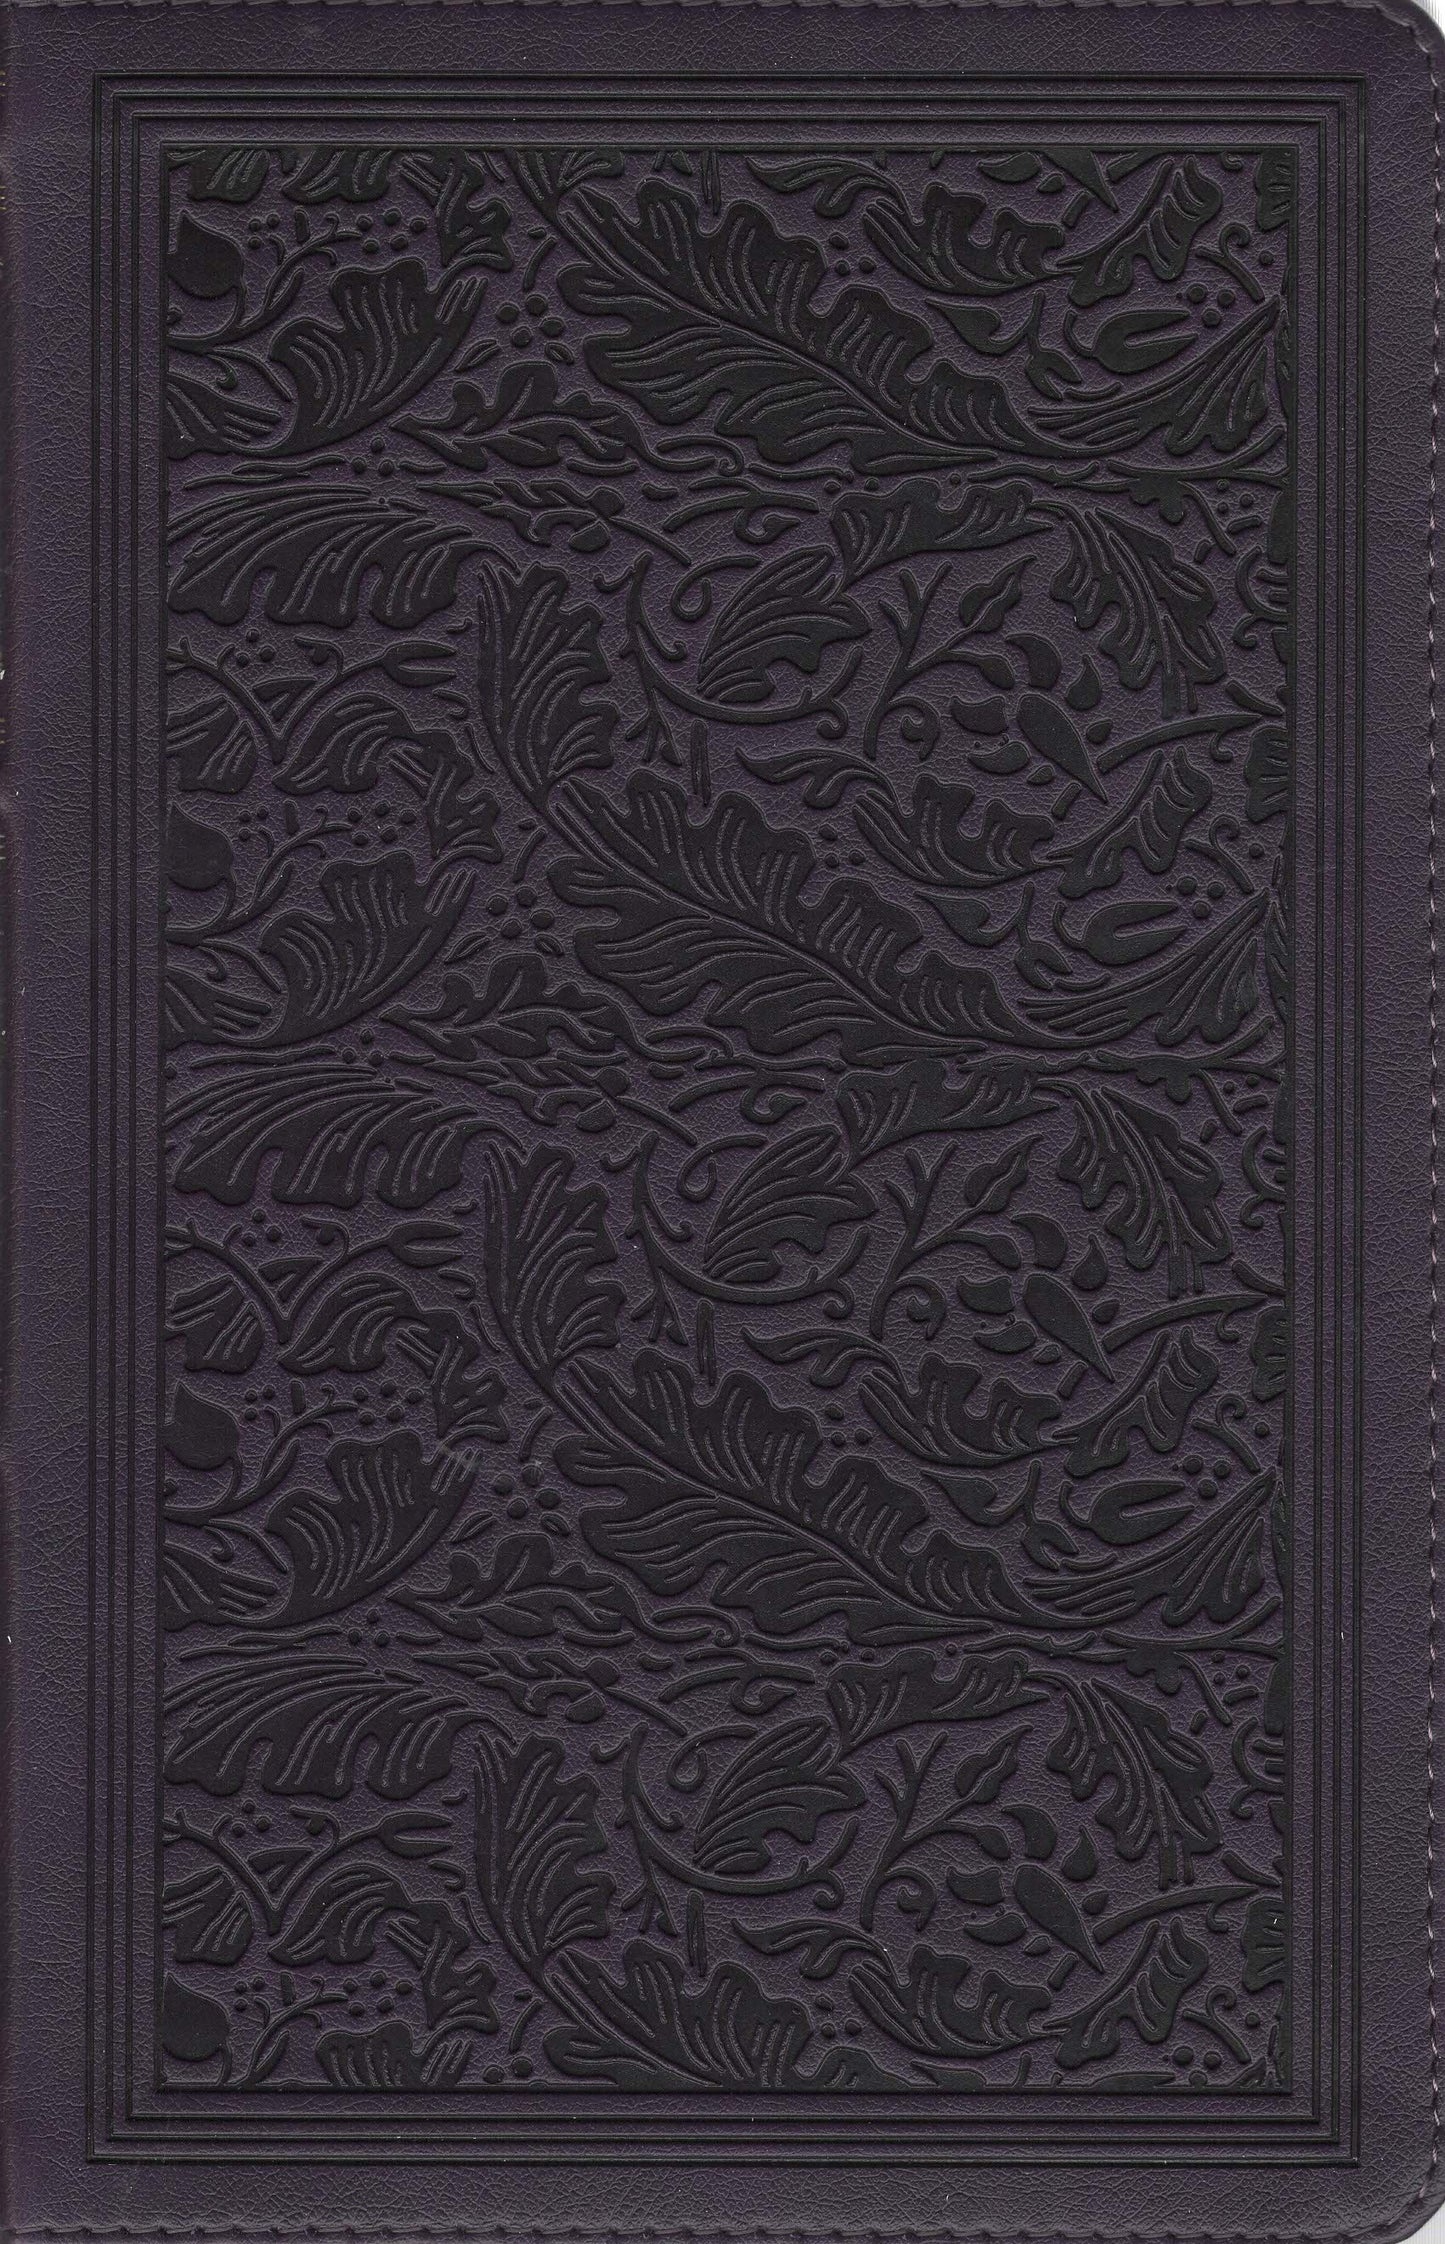 Thomas Nelson KJV Sovereign Collection Personal Size Edition w/Comfort Print® - Leathersoft™